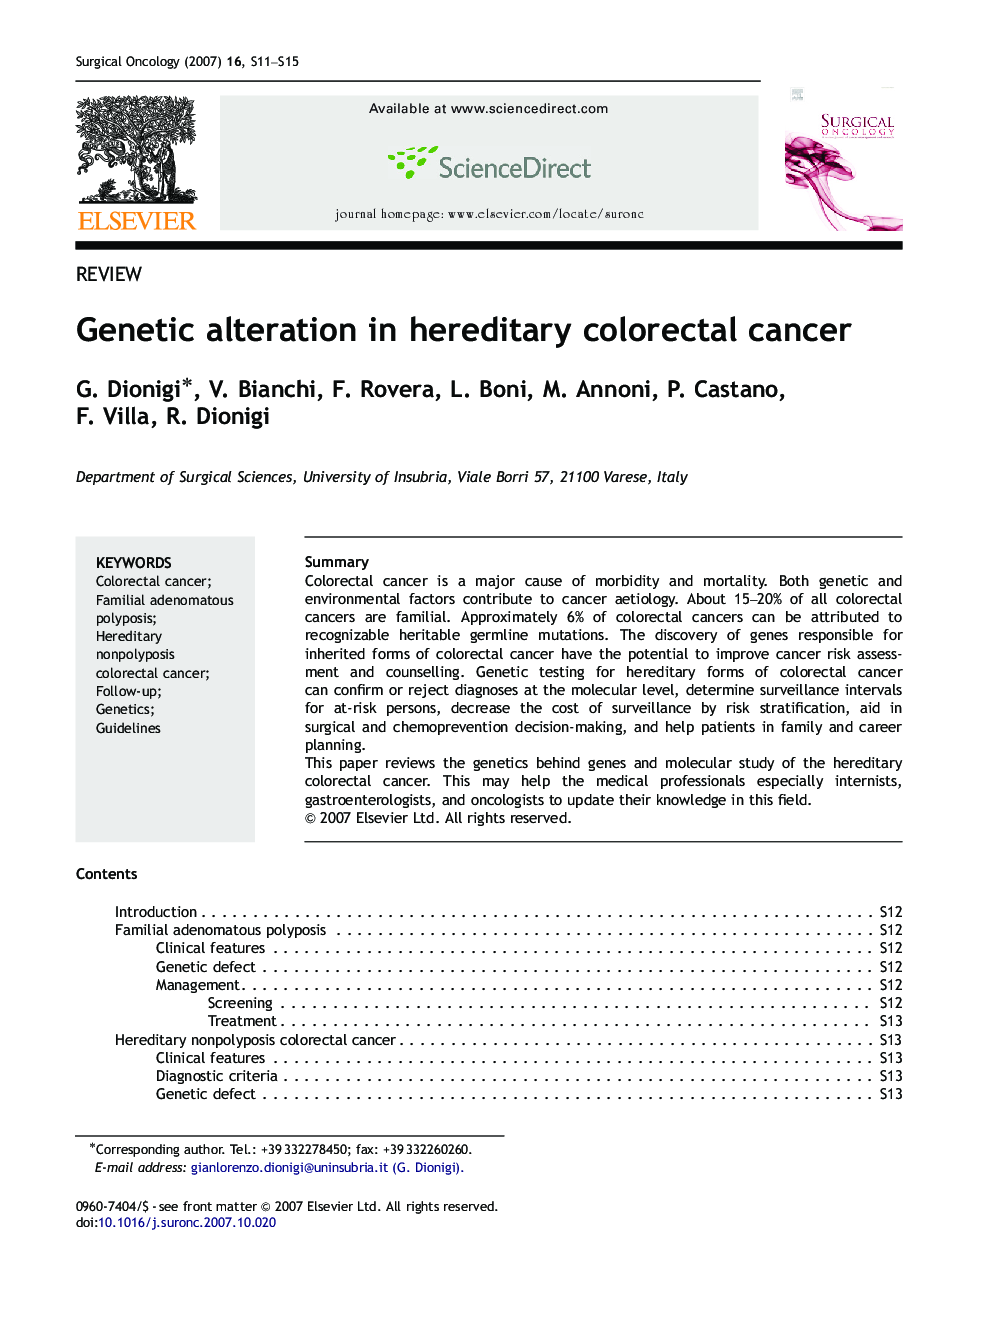 Genetic alteration in hereditary colorectal cancer